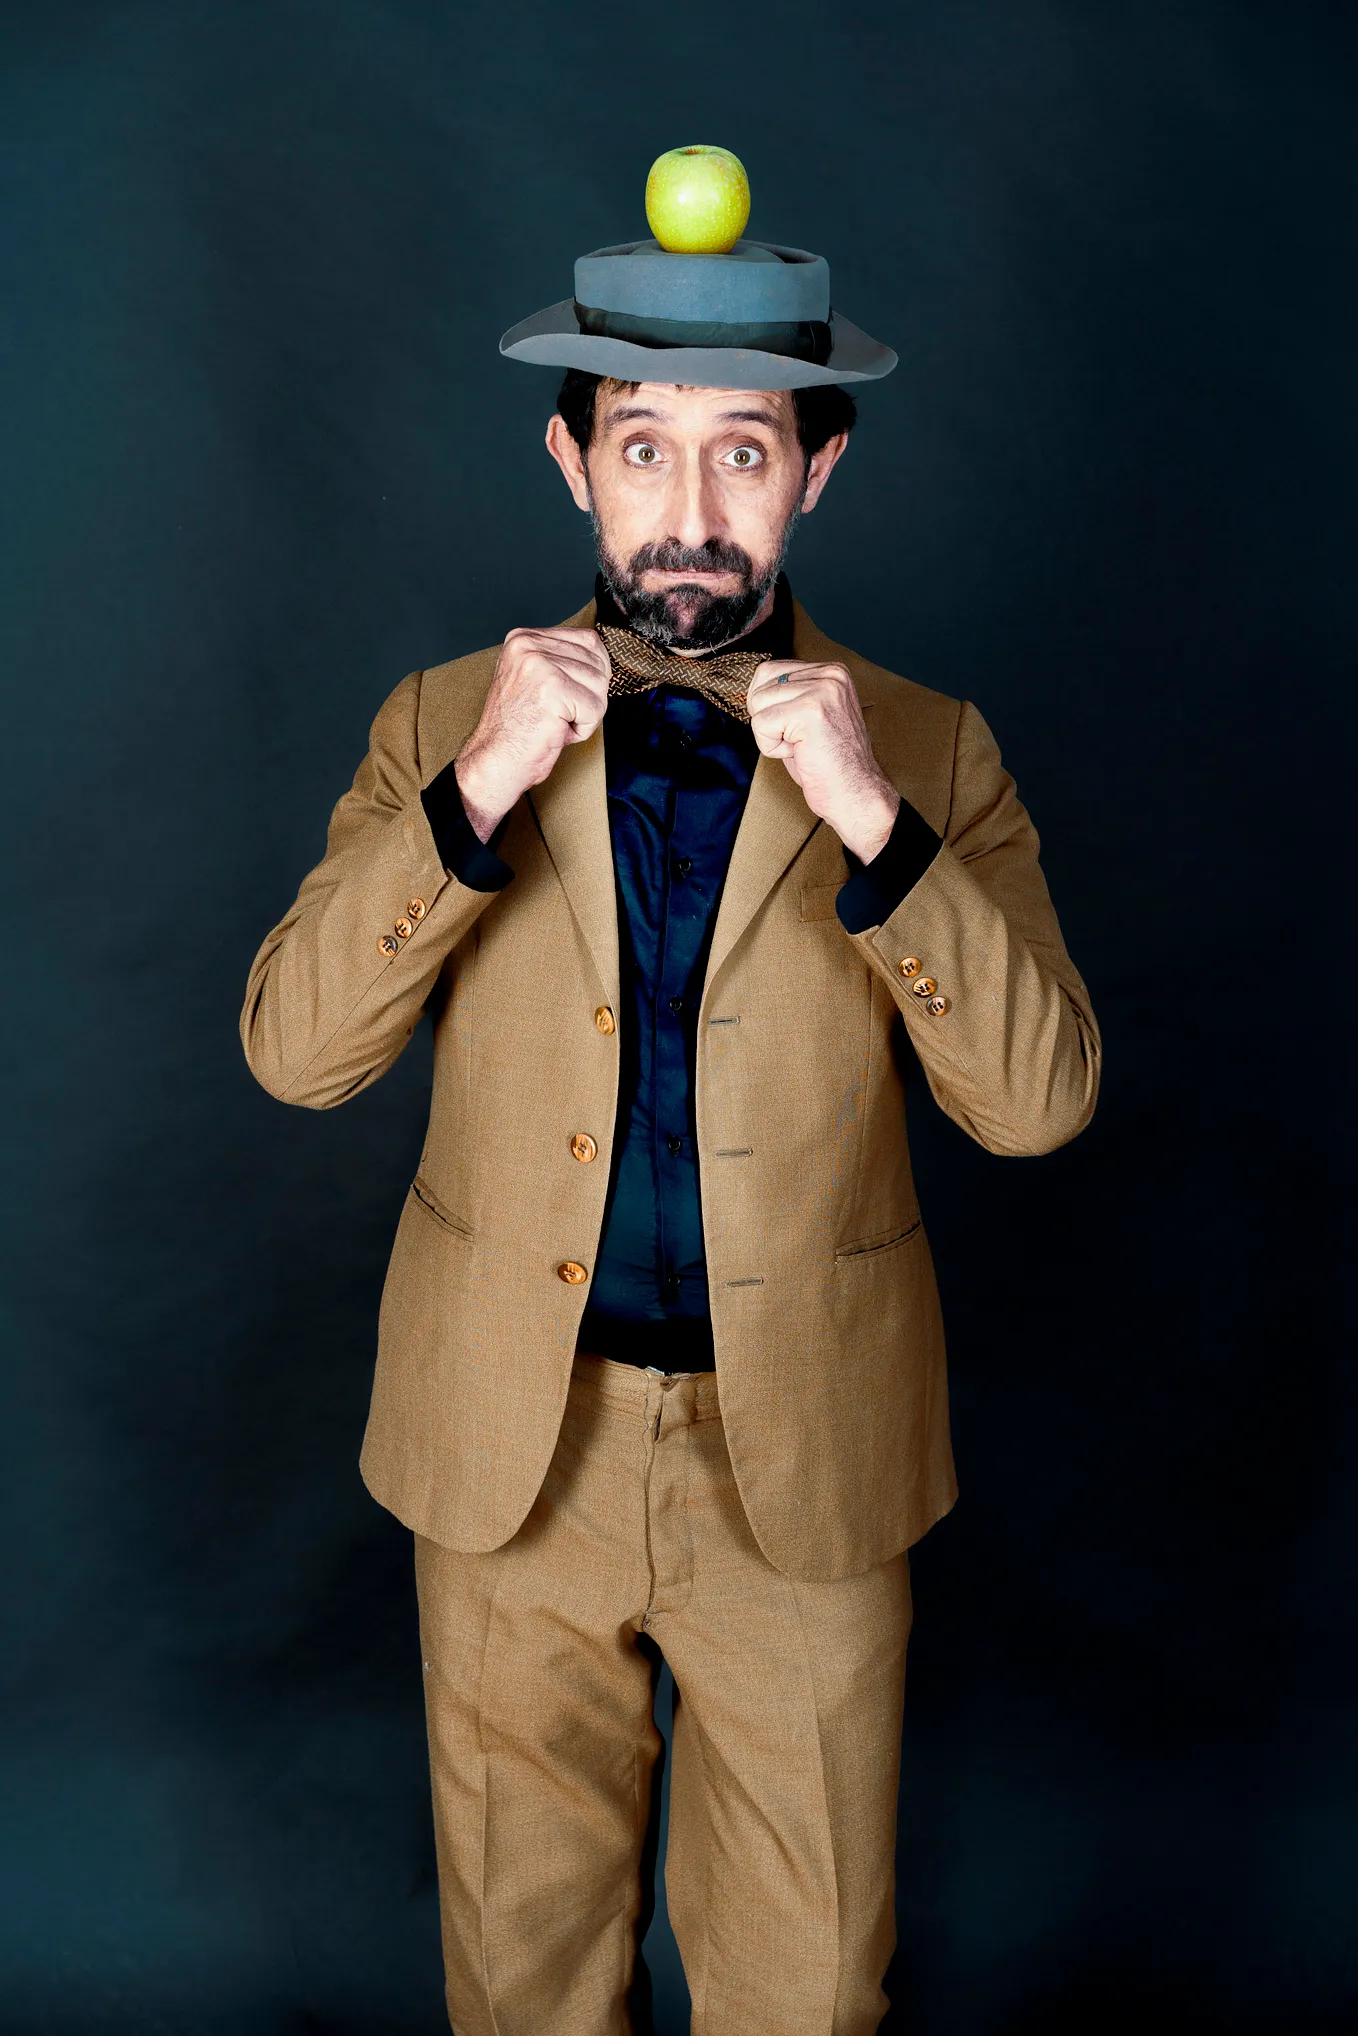 Coloured image shows a man standing against a dark background. He is wearing a brown suit and navy shirt. He has a felt hat on his head, and an apple sits on top of the hat. He has a dark beard and a perplexed expression. He is in the act of adjusting his bow tie.